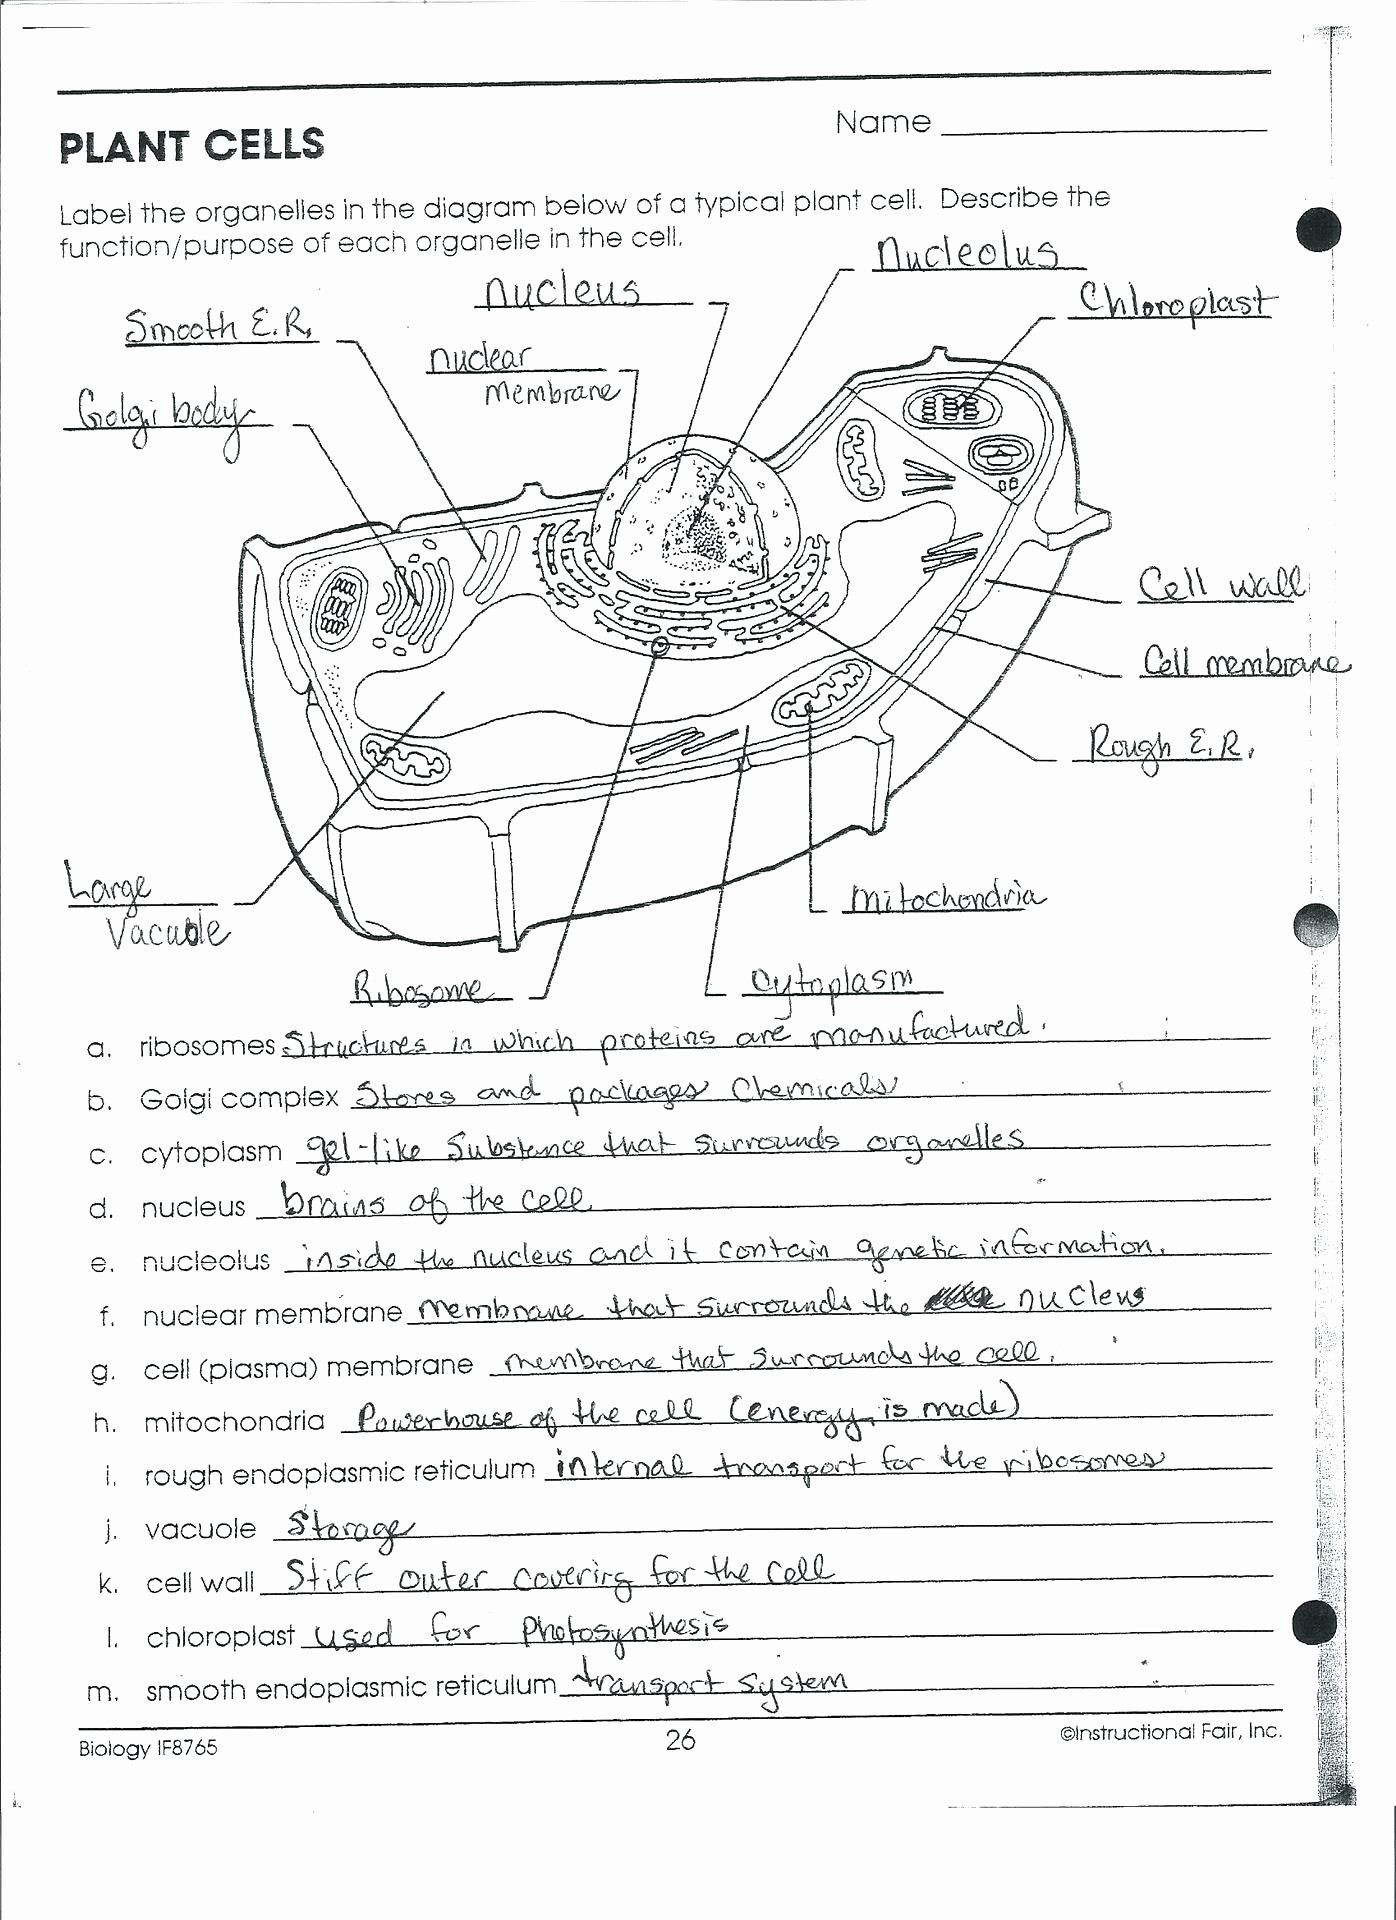 Animal Cell Worksheet Answers 50 Animal Cell Worksheet Answers In 2020